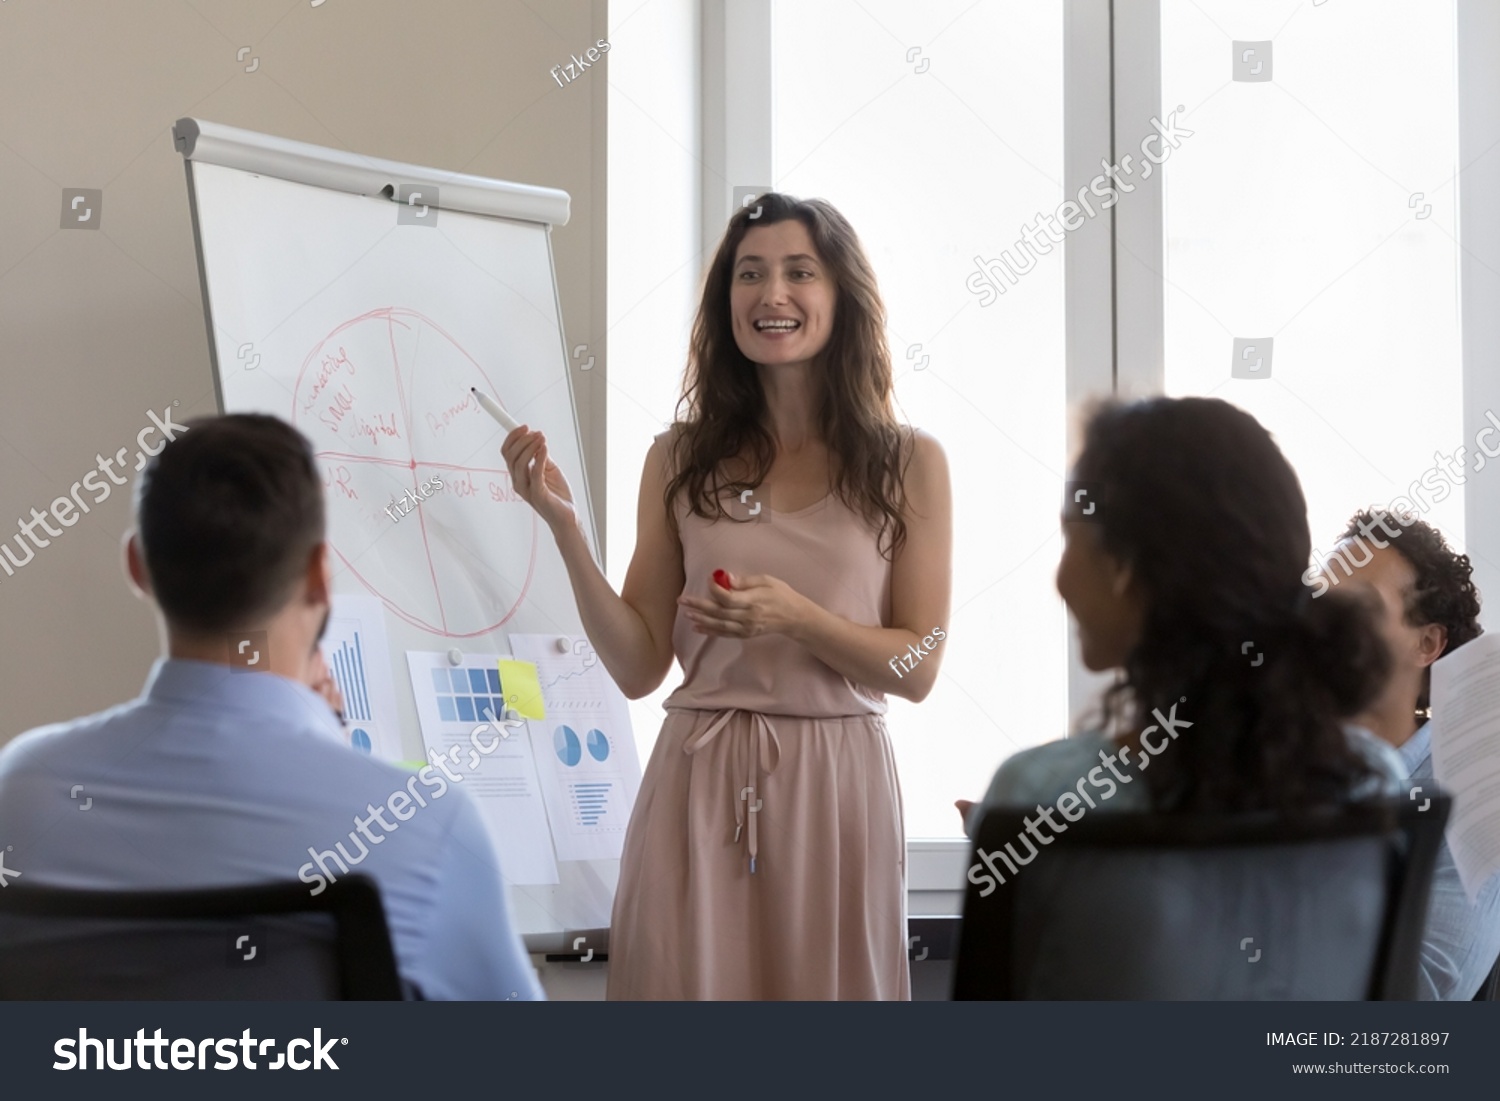 Business training event, presentation for staff or clients concept. Multi ethnic seminar participants listen to attractive confident smiling trainer make speech, give information shown on flip chart #2187281897